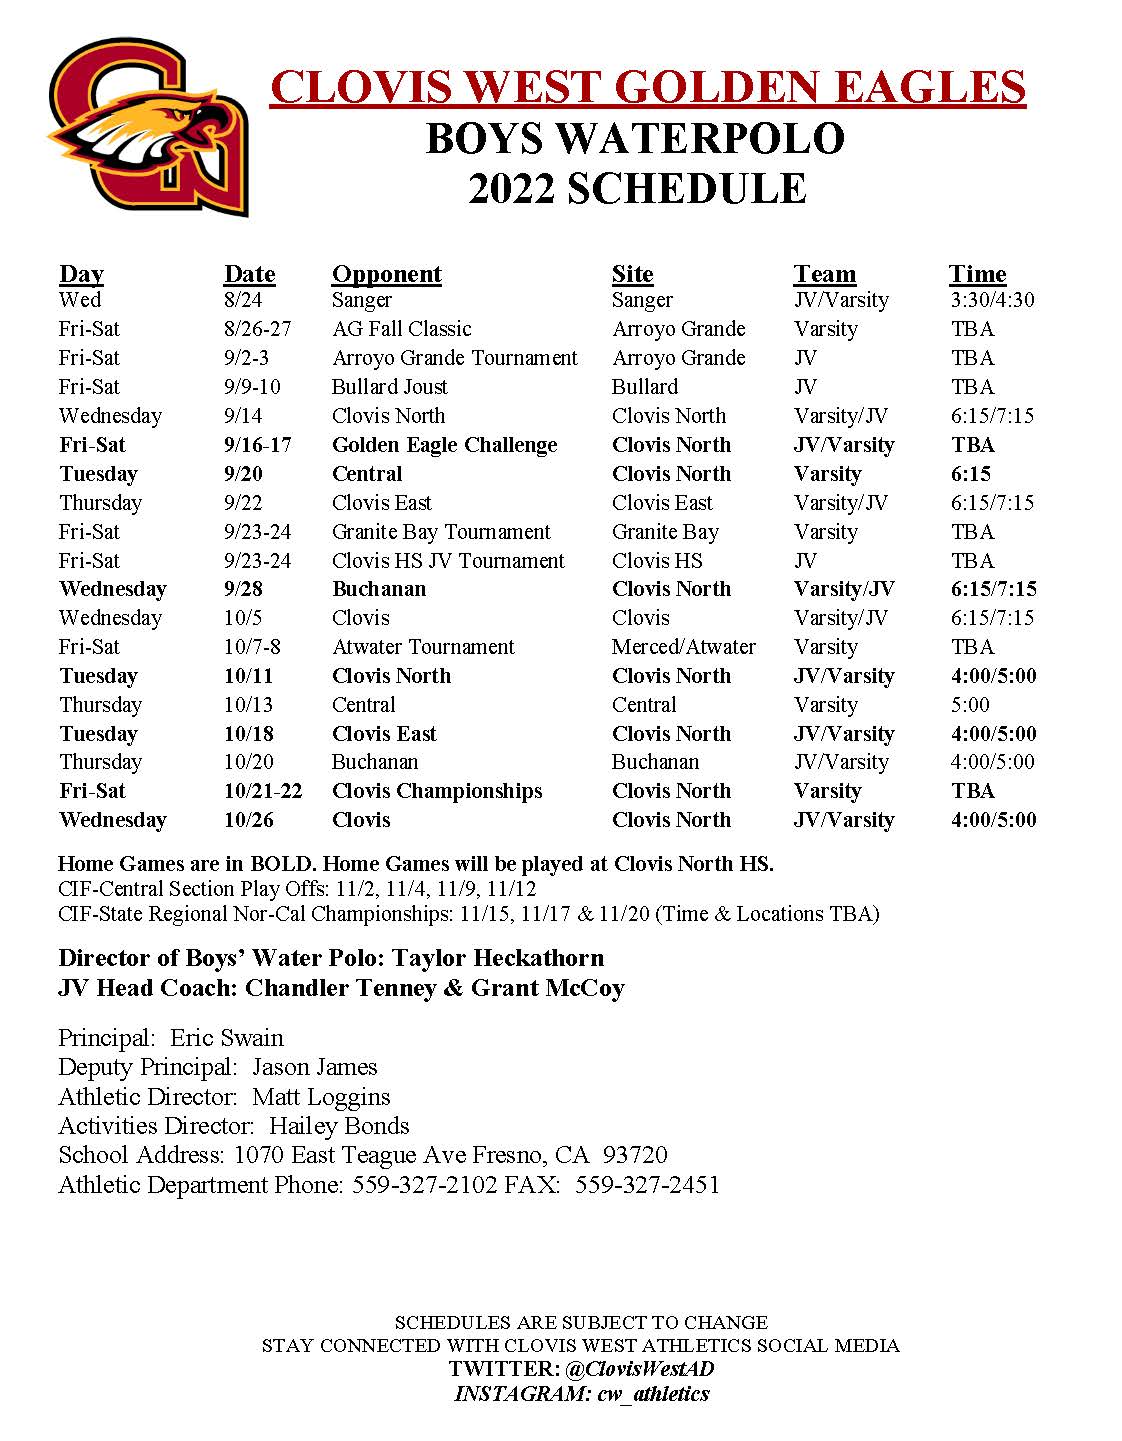 Boys WaterPolo schedule